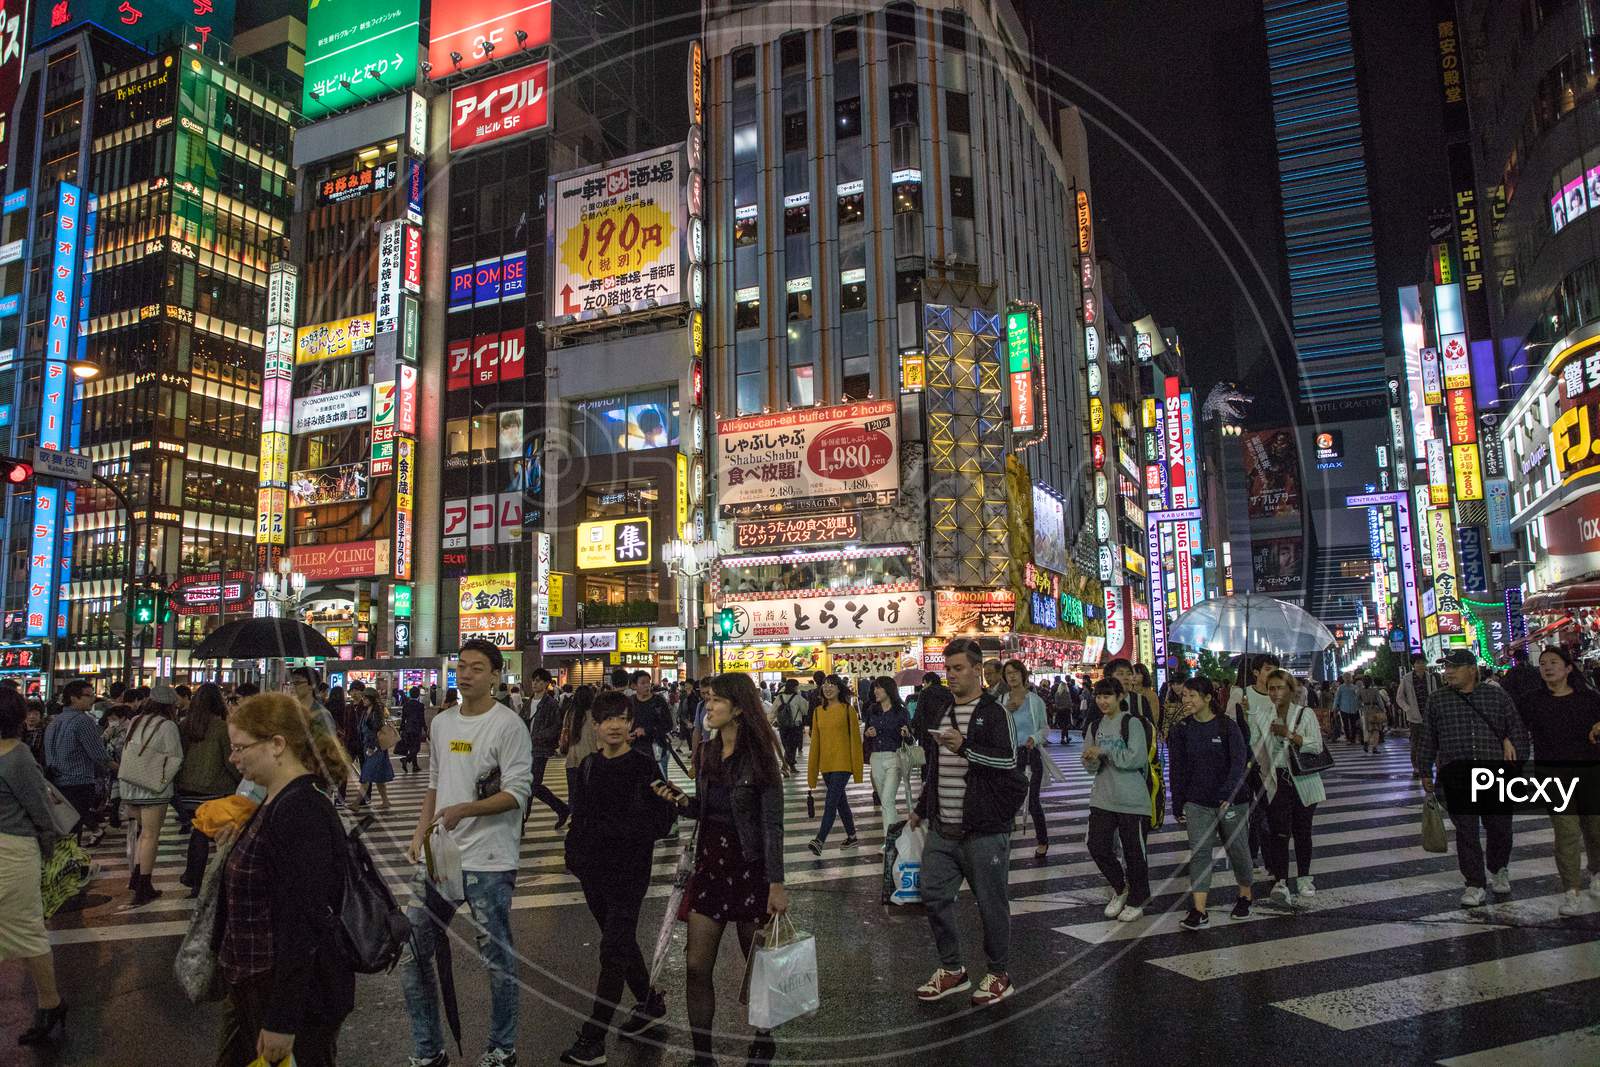 TOKYO/JAPAN - 30th July, 2019 : Shibuya Scramble is known for its busiest crossroads in the world and is the leader of most people’s must-see list in Tokyo.